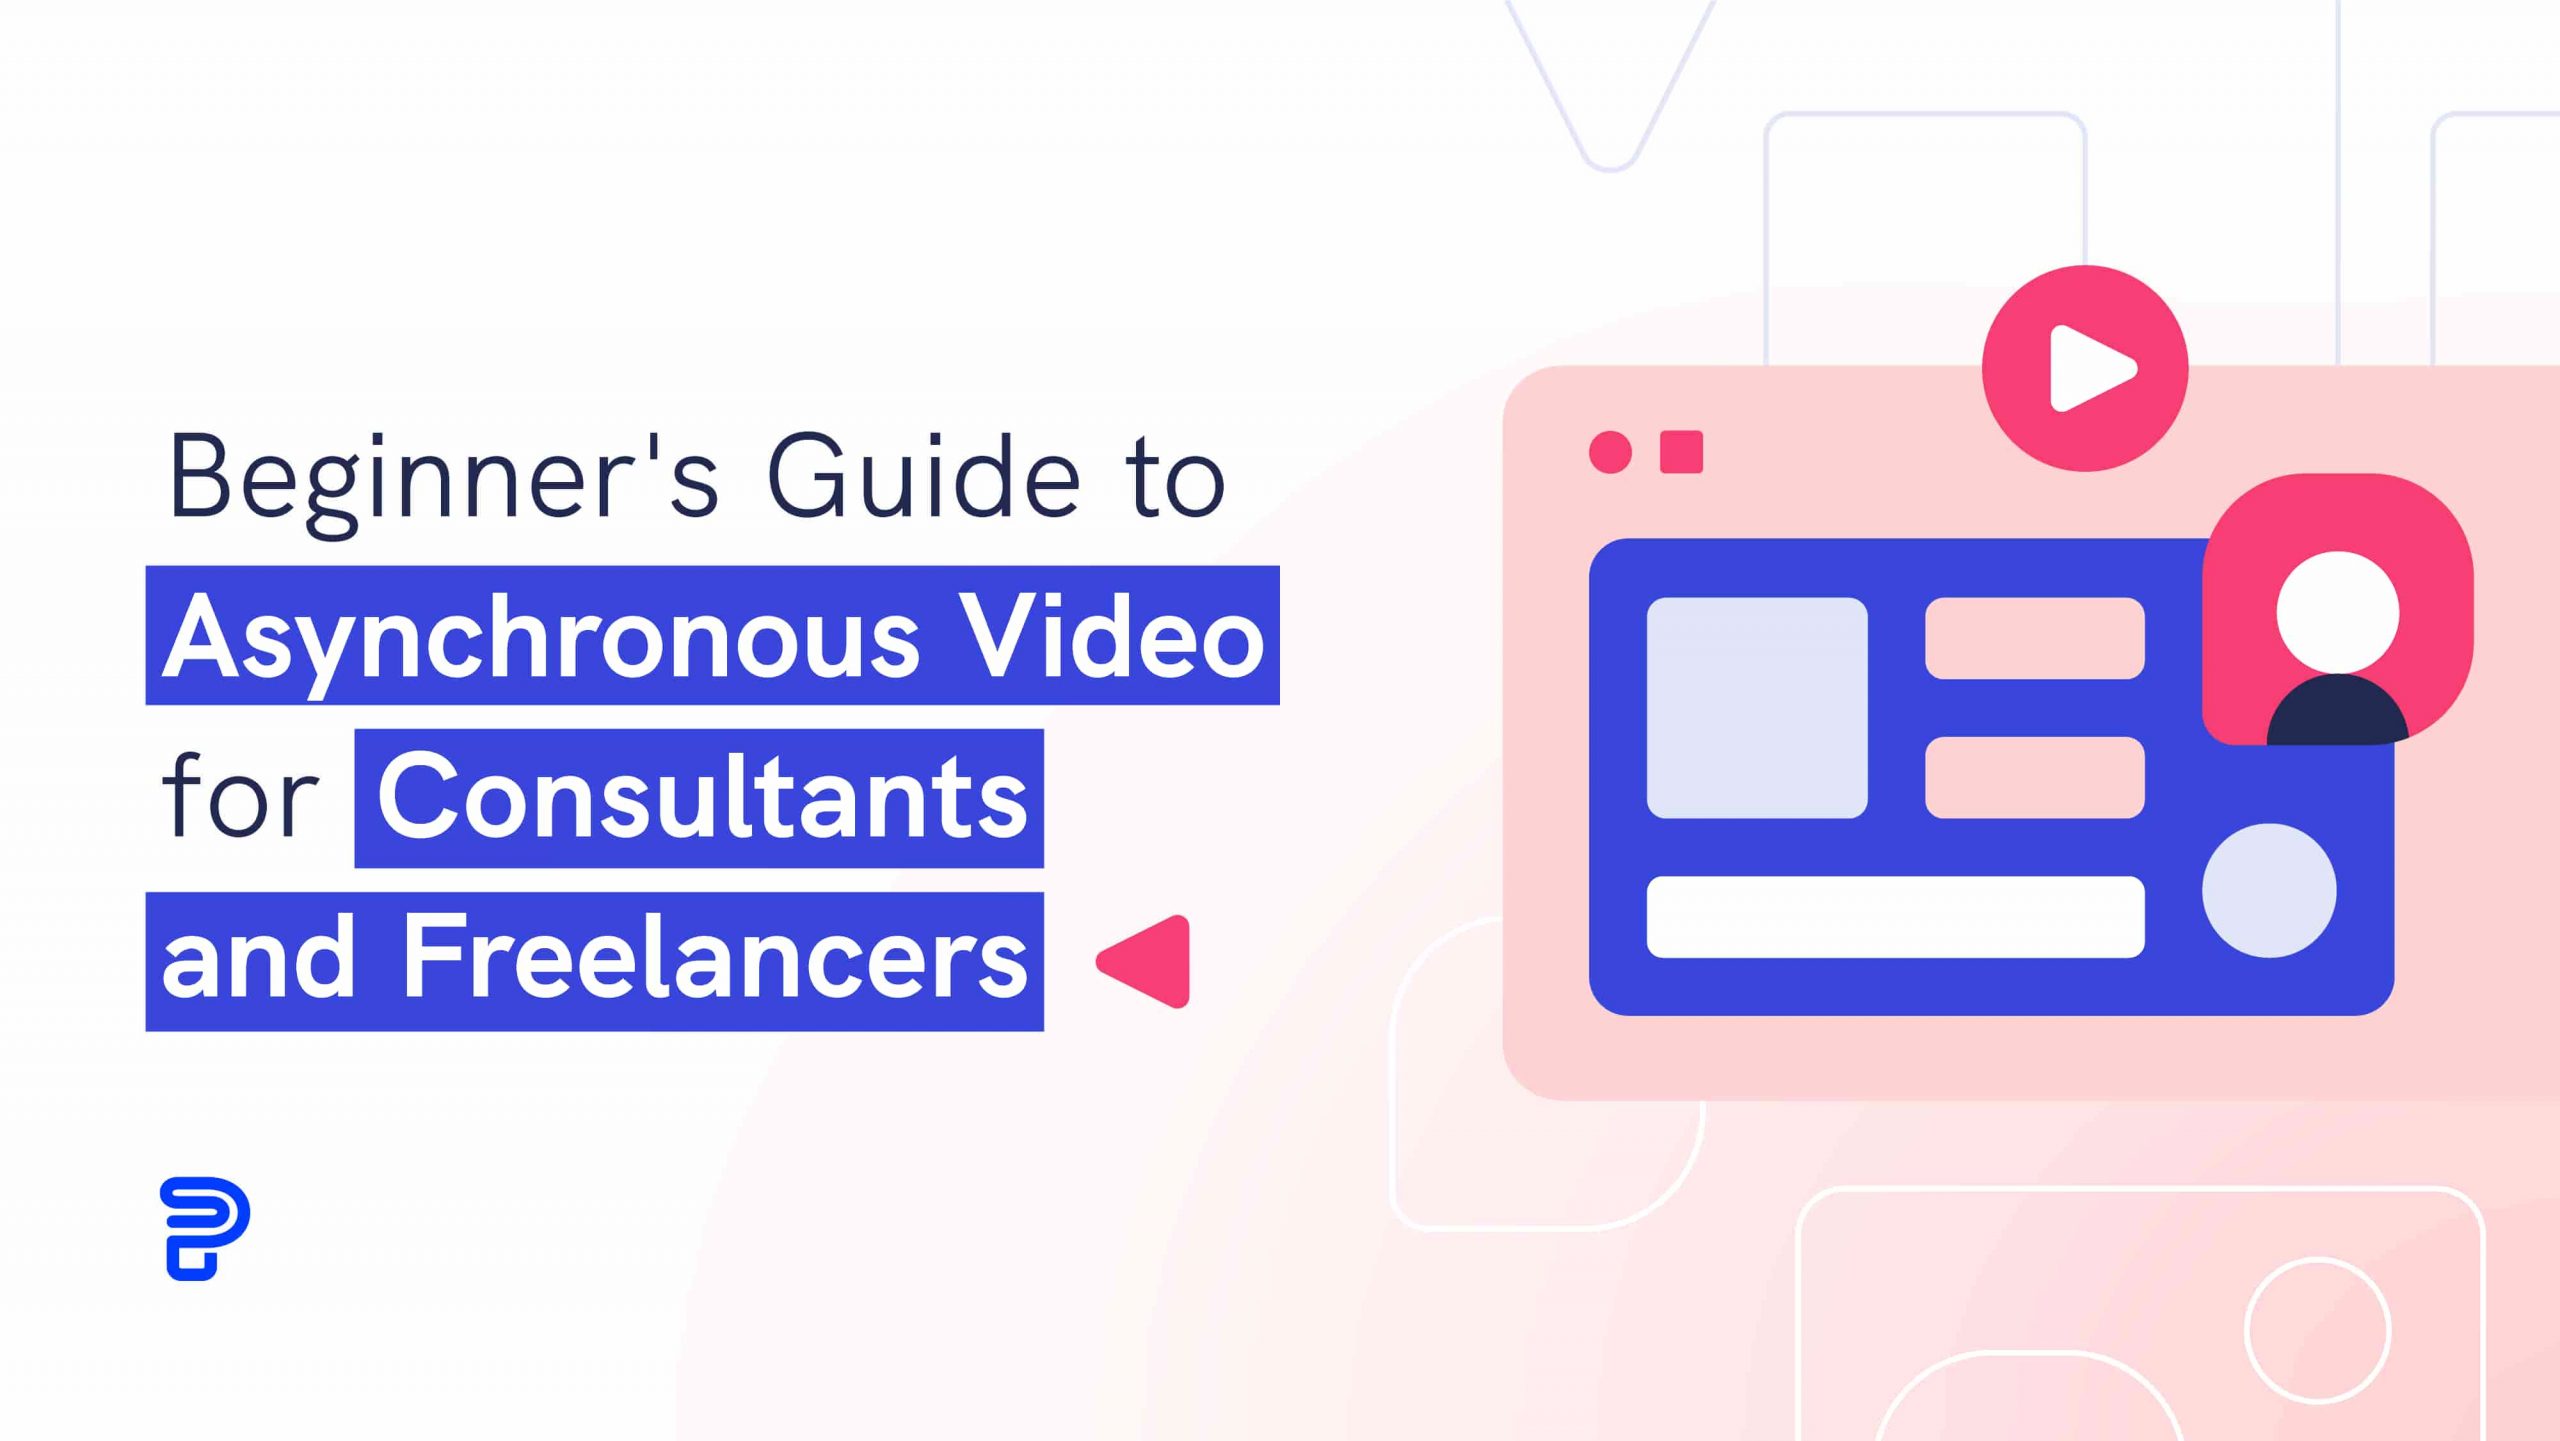 Beginner's Guide to Asynchronous Videos for Freelancers and Consultants